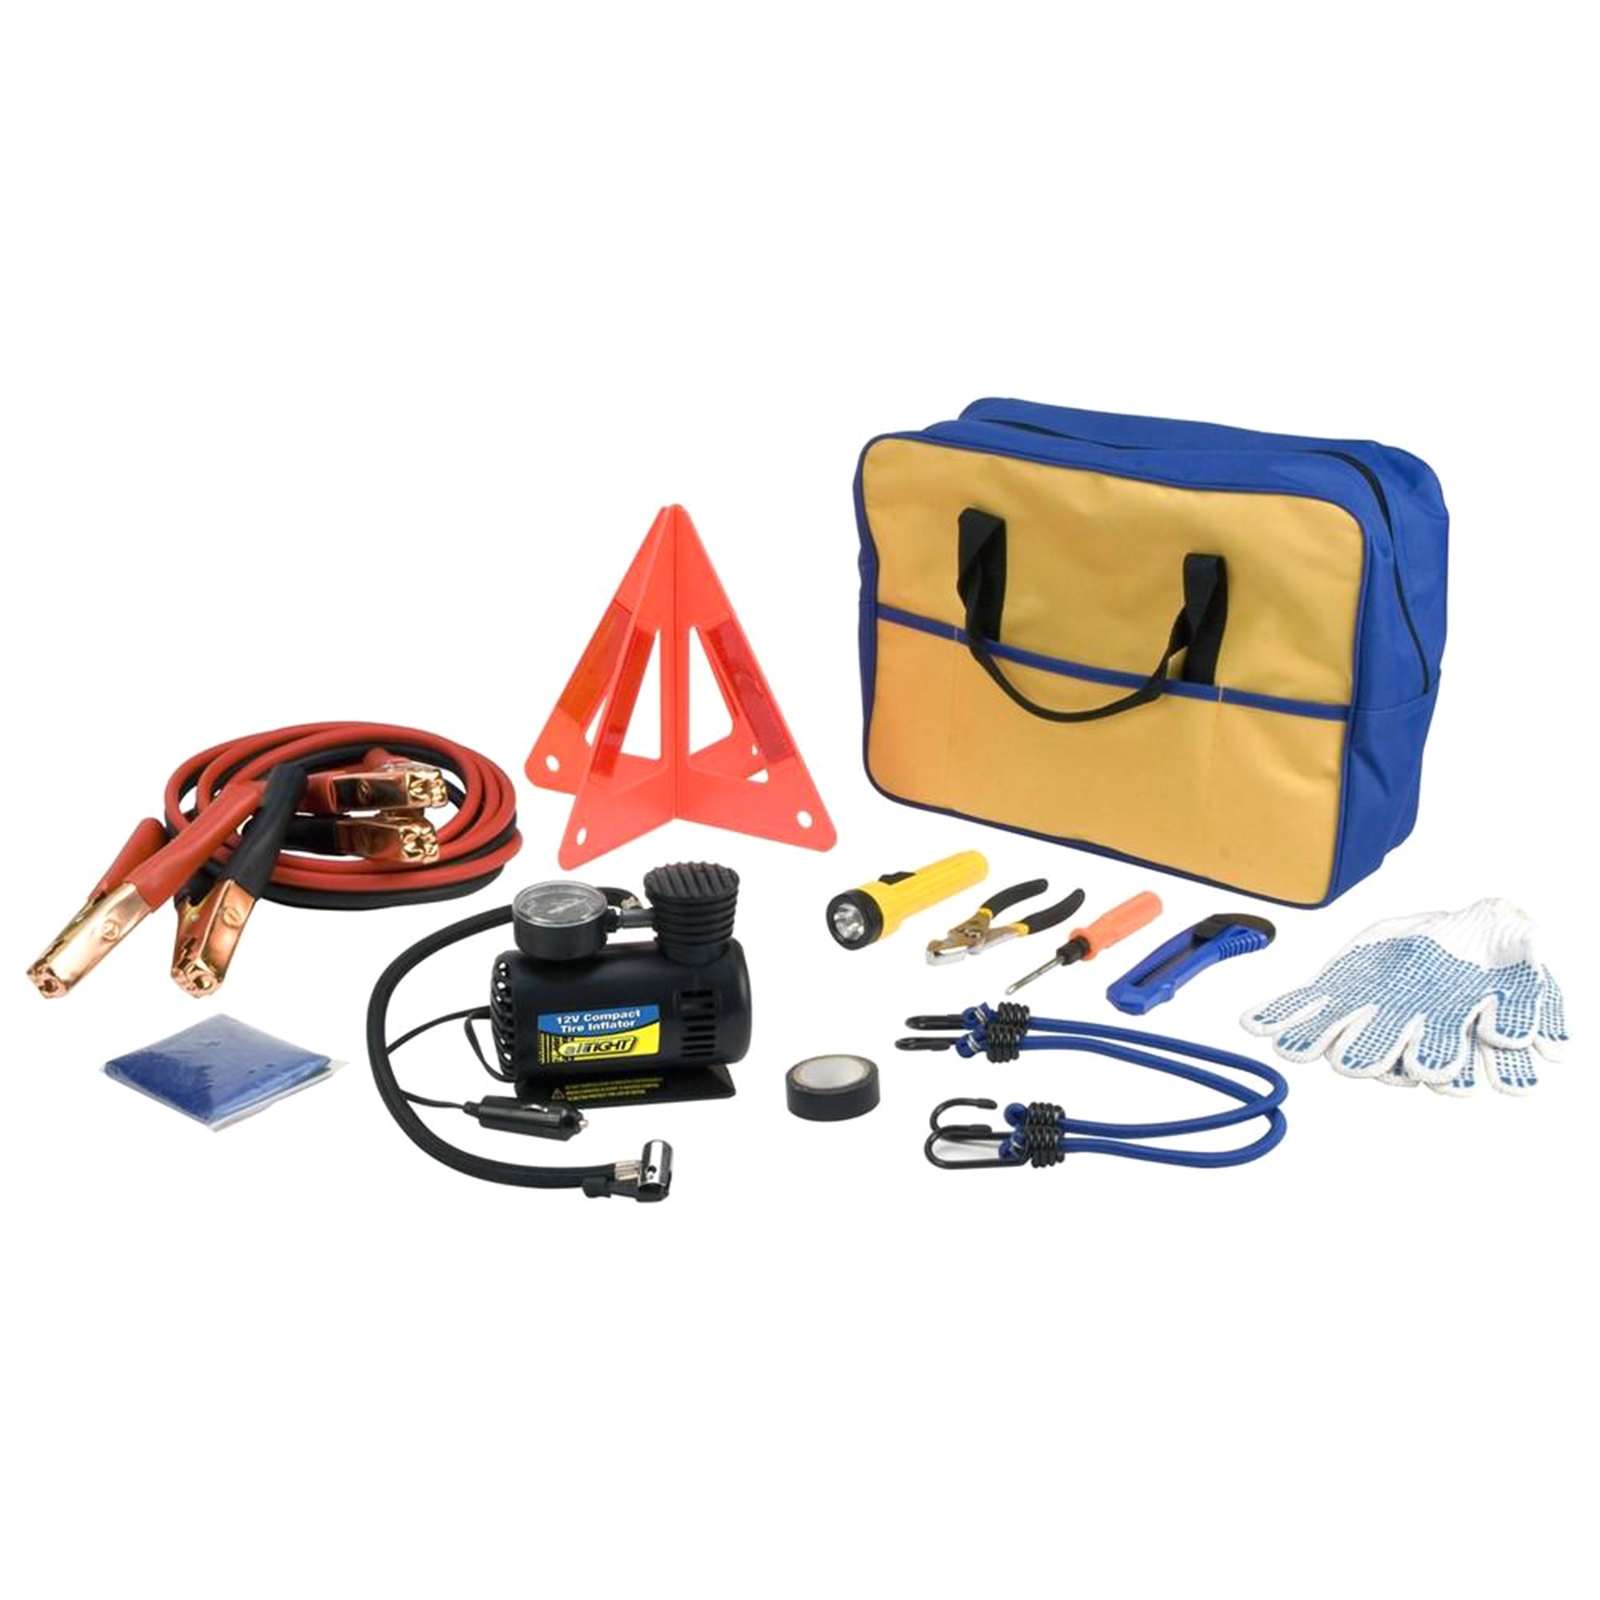 Performance Tool 60220 Premium Roadside Emergency Kit with Carry Case